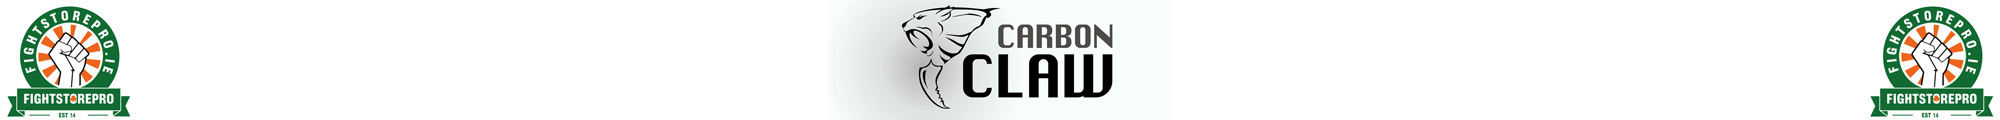 Carbon Claw - Fightstore Ireland